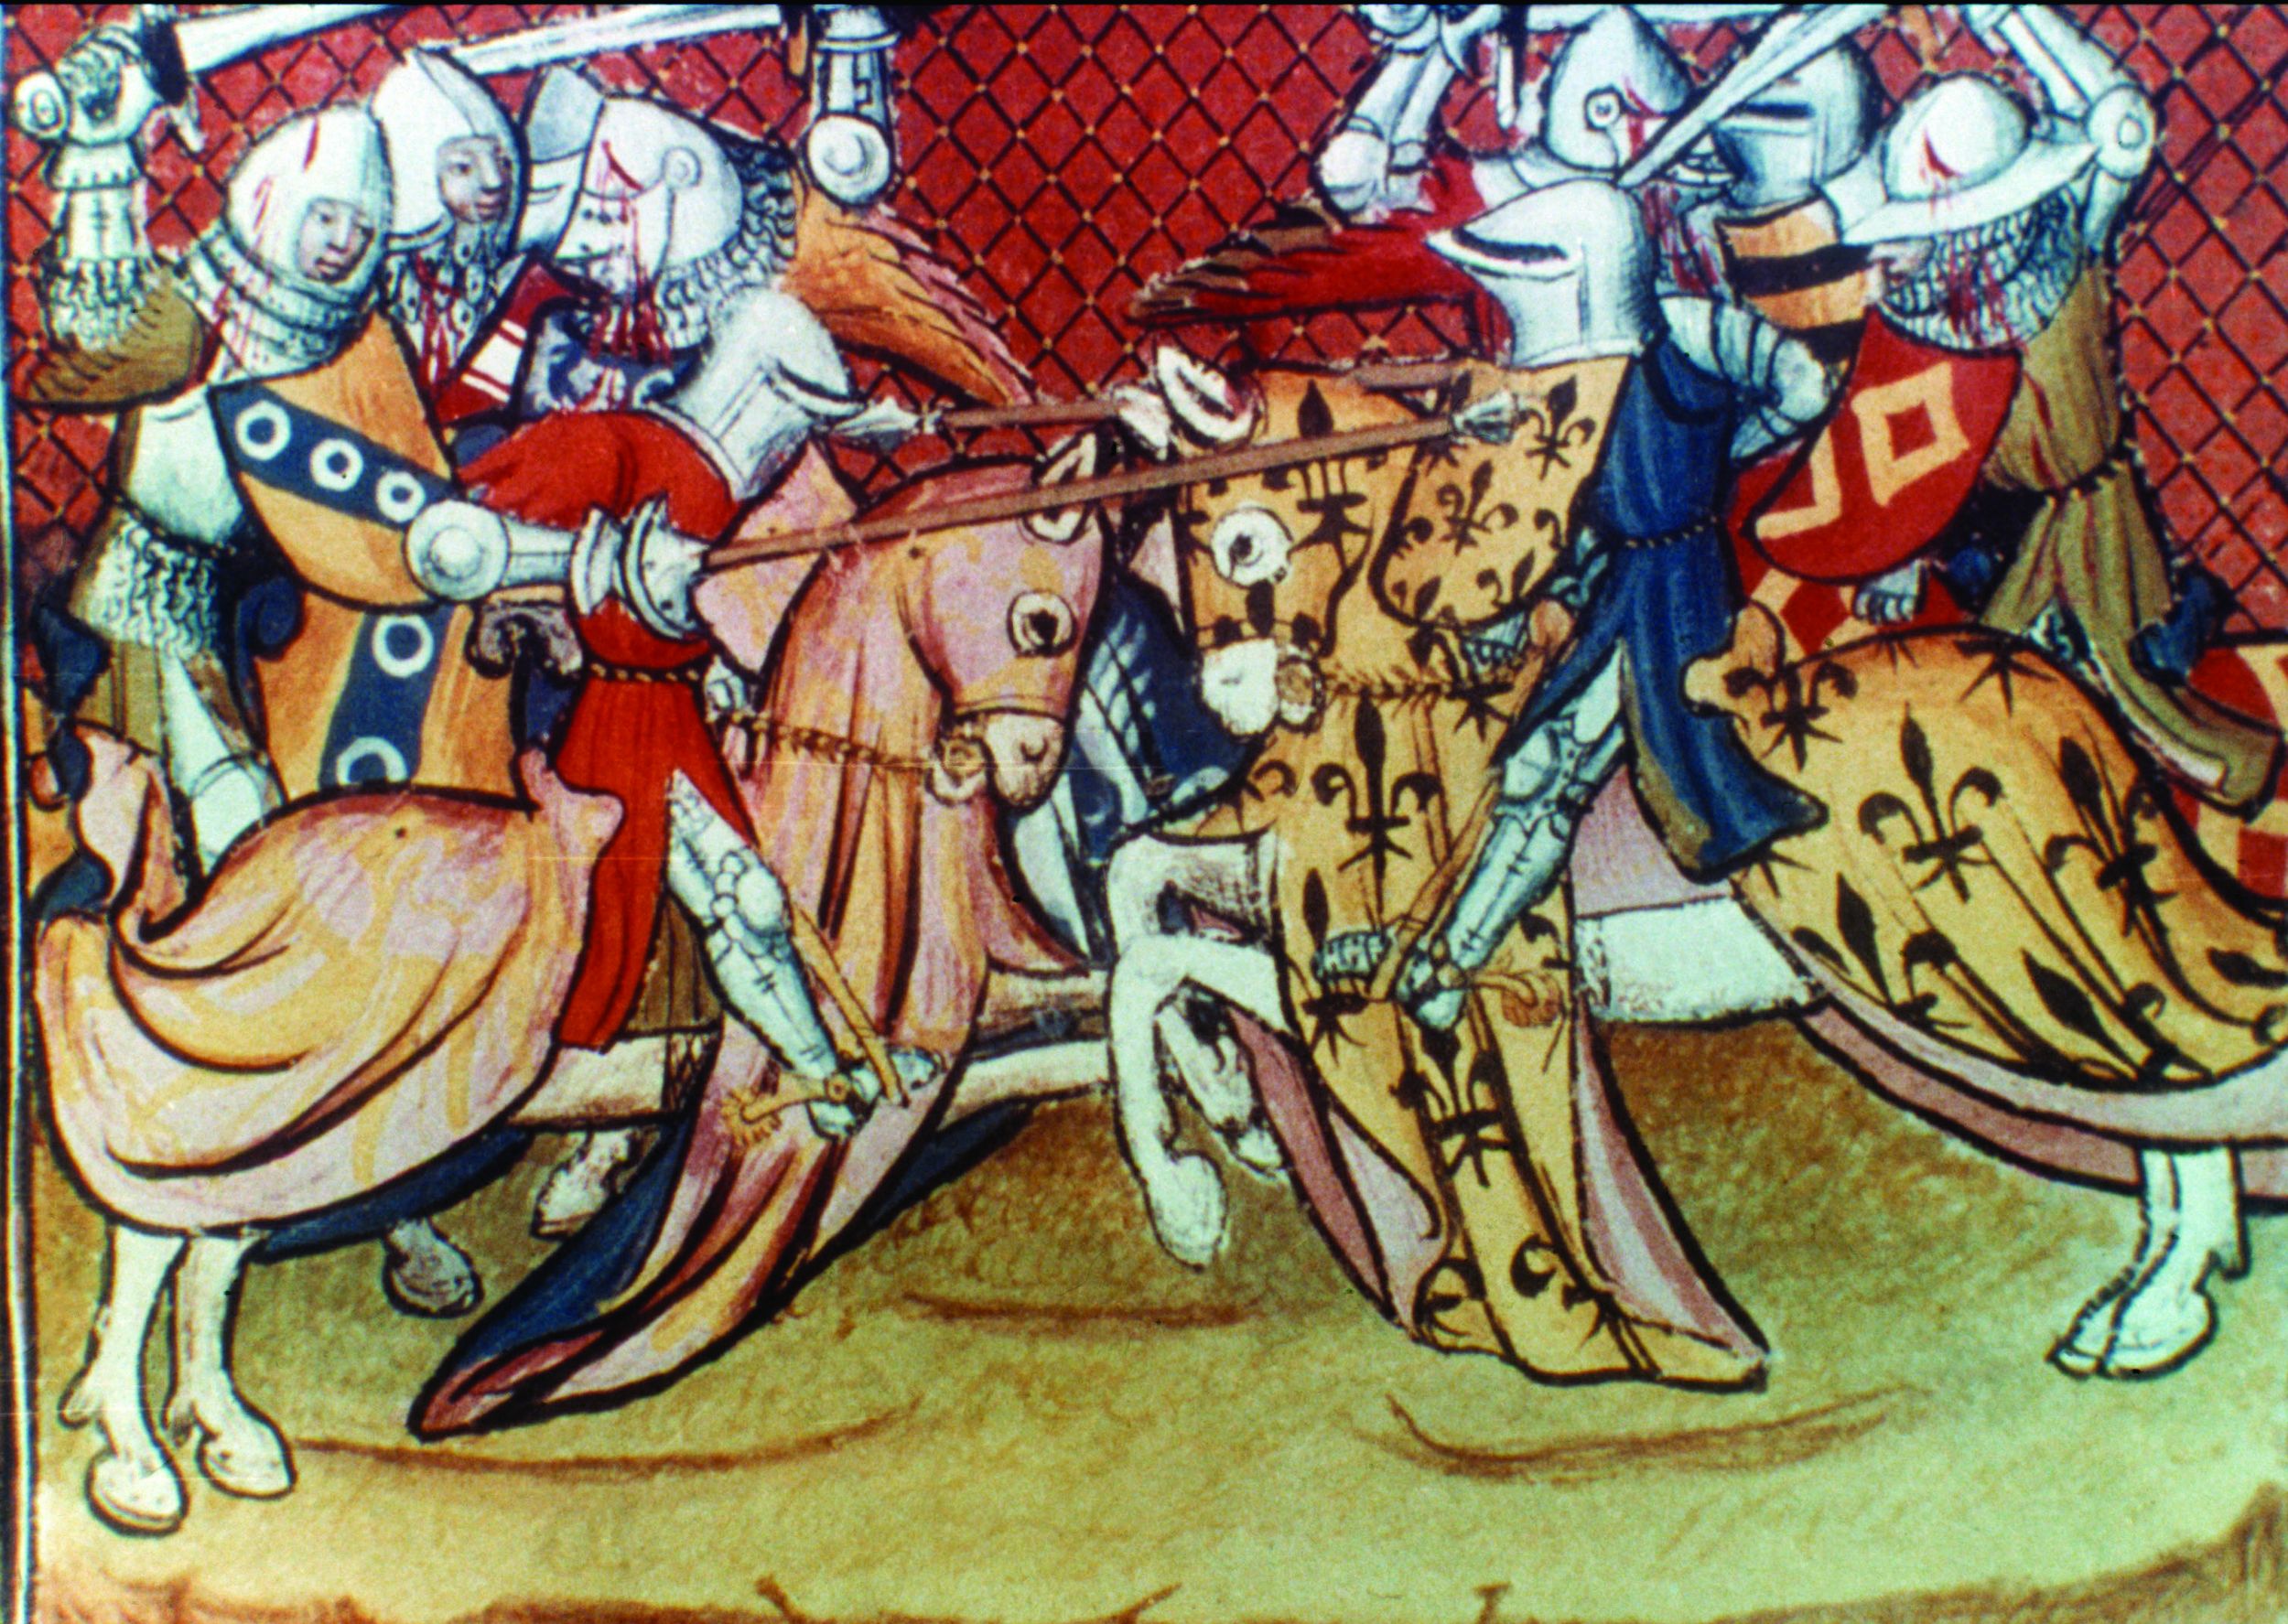 A French knight, right, sports the royal fleur-de-lis in a 15th-century illuminated manuscript.